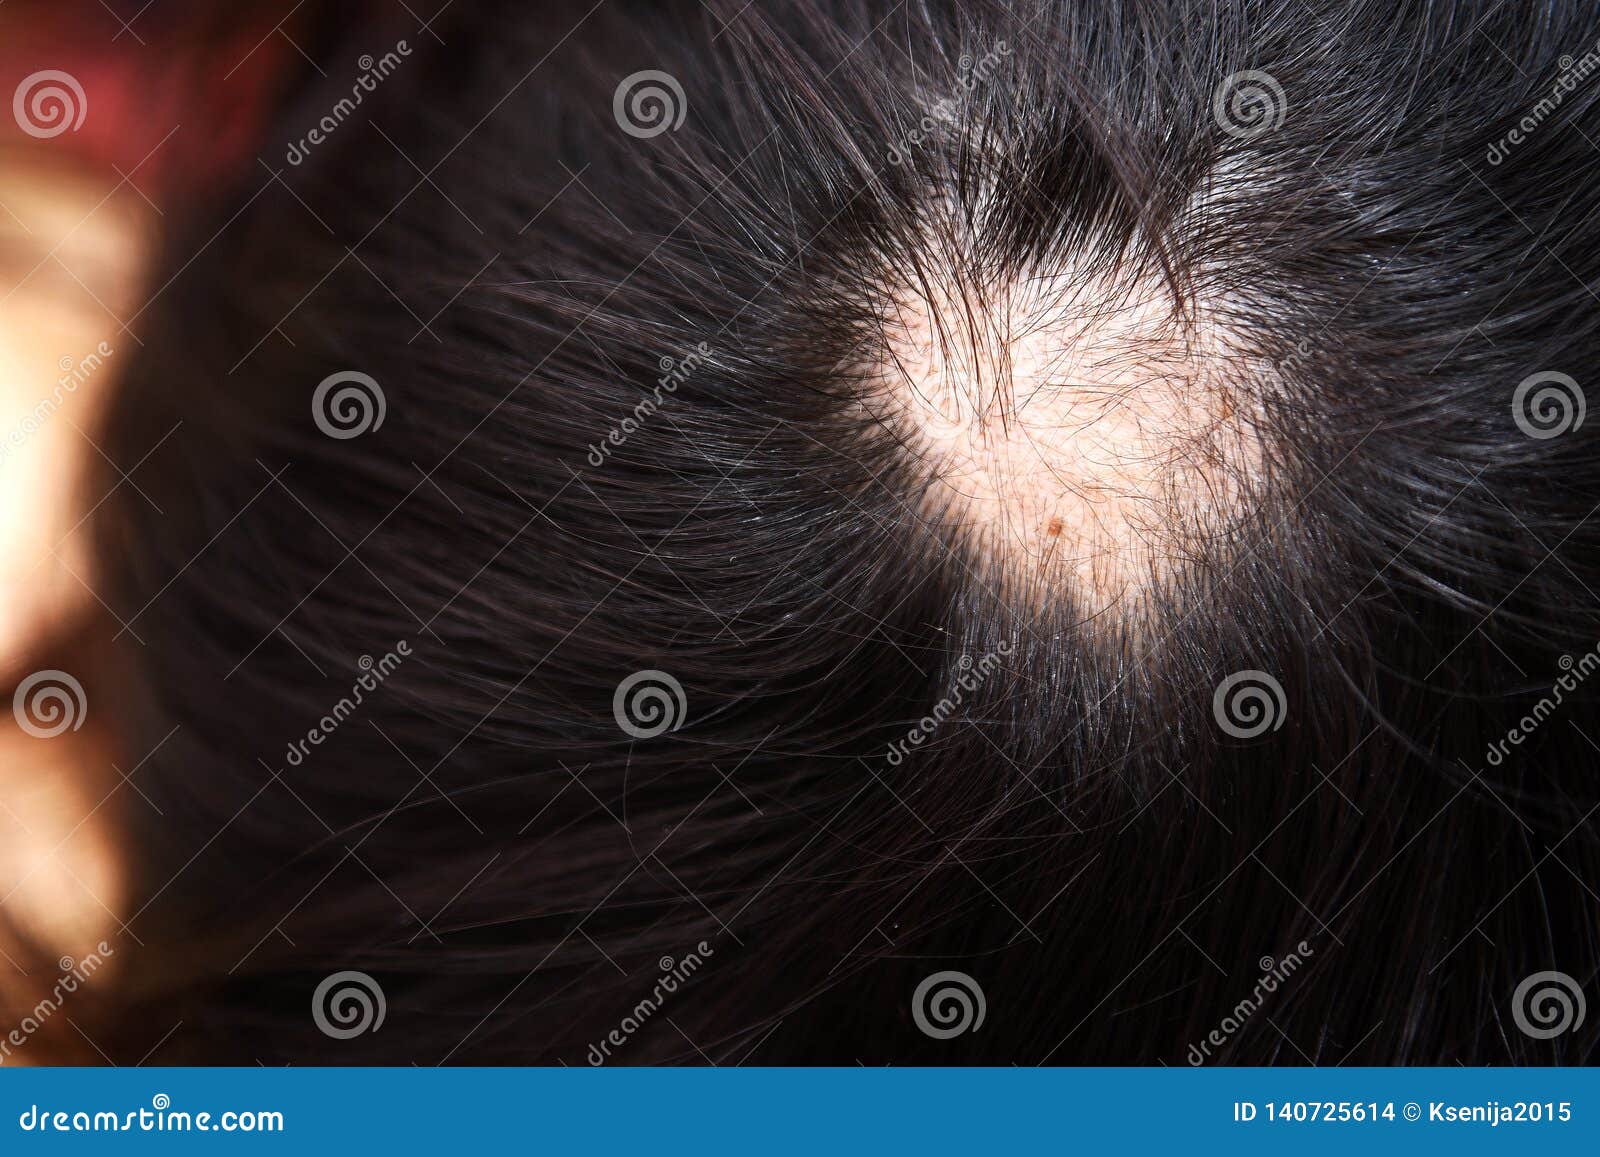 treatment of baldness with beauty injections.